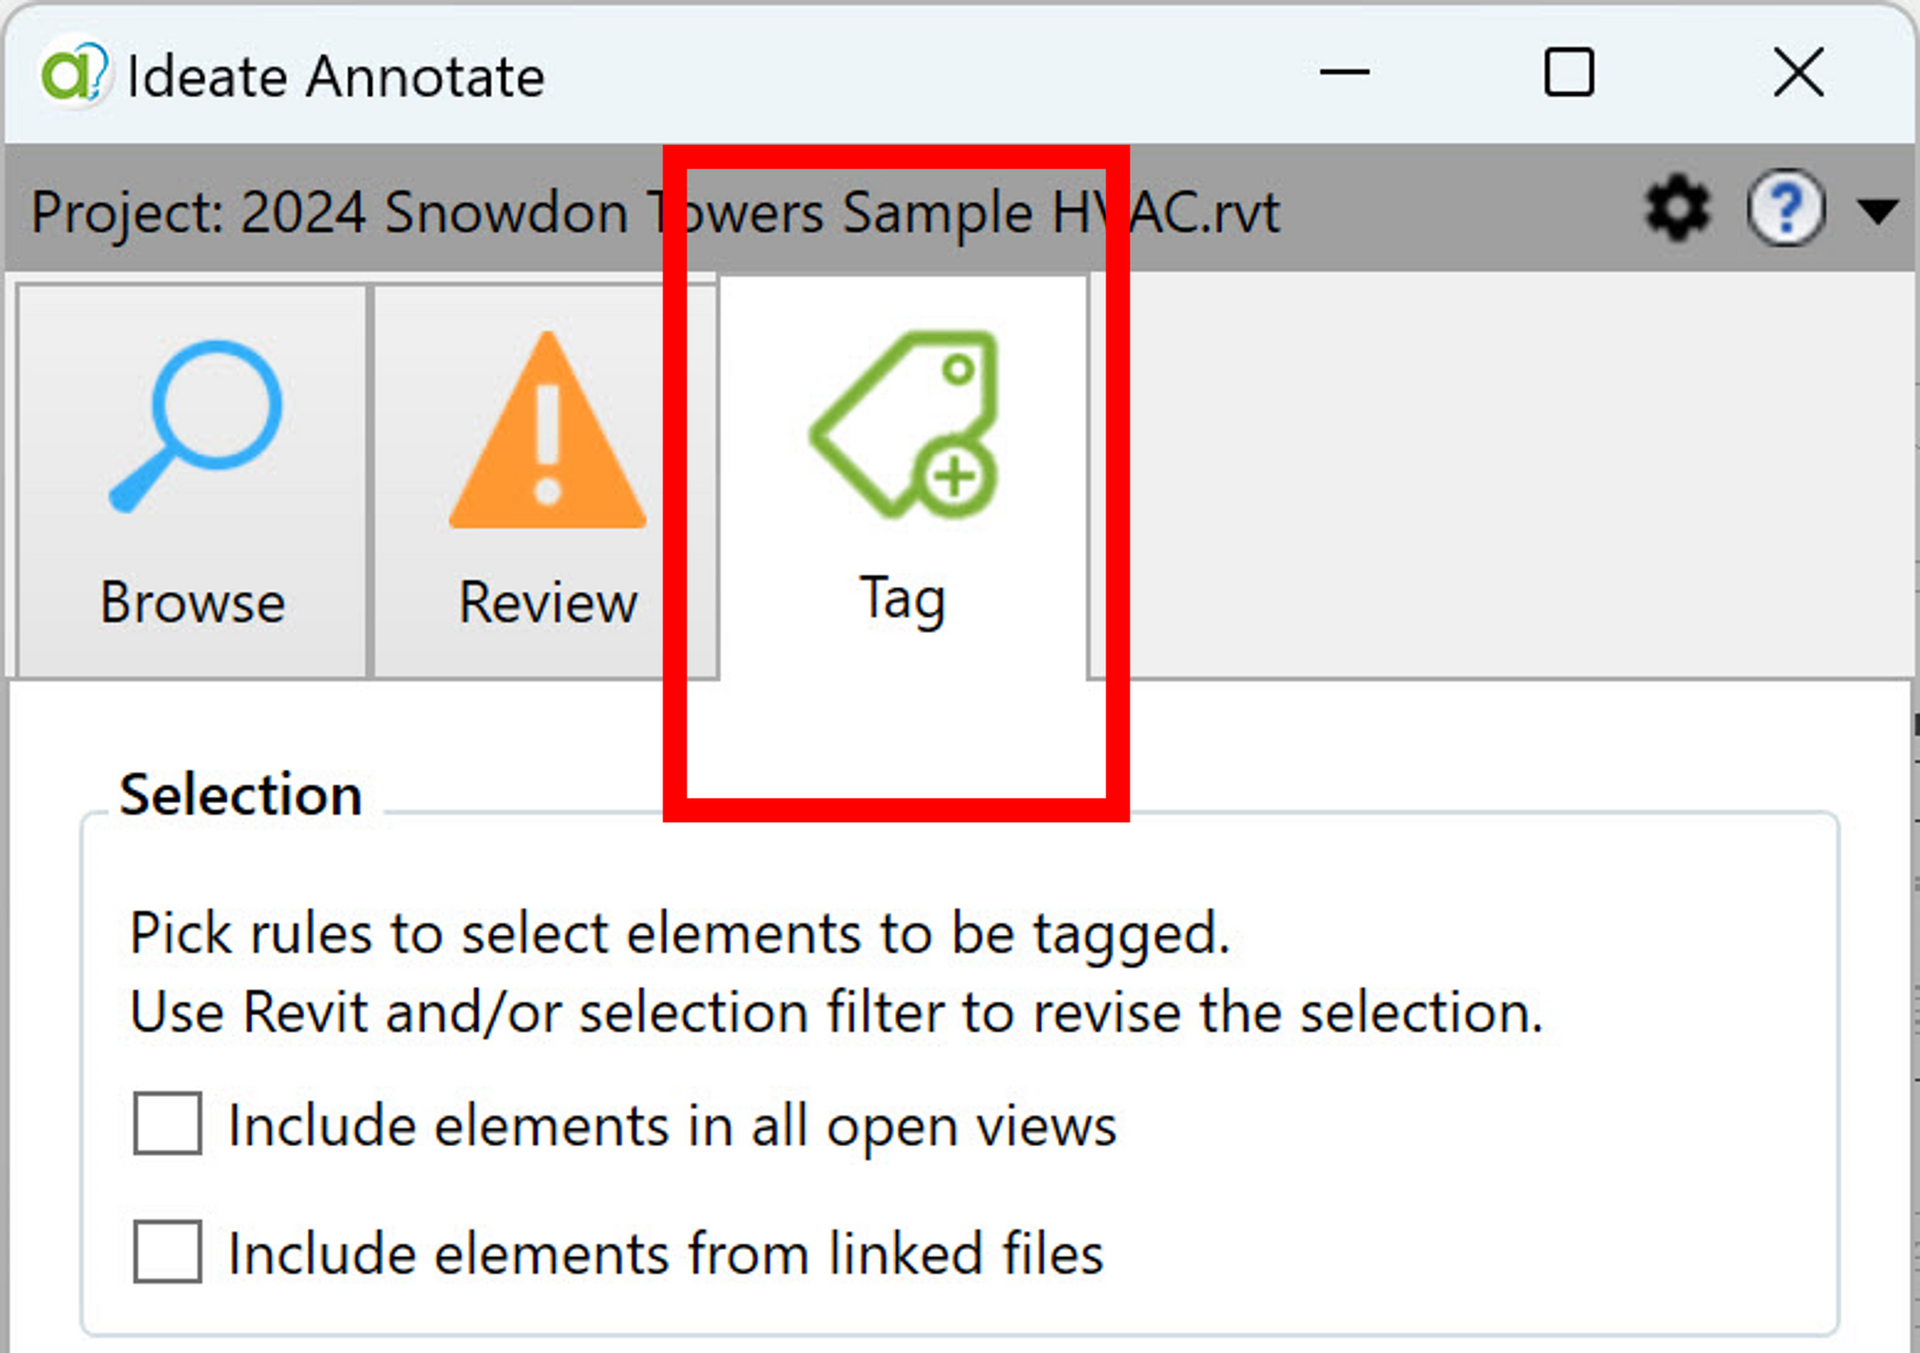 Ideate Annotate - Tag Tab